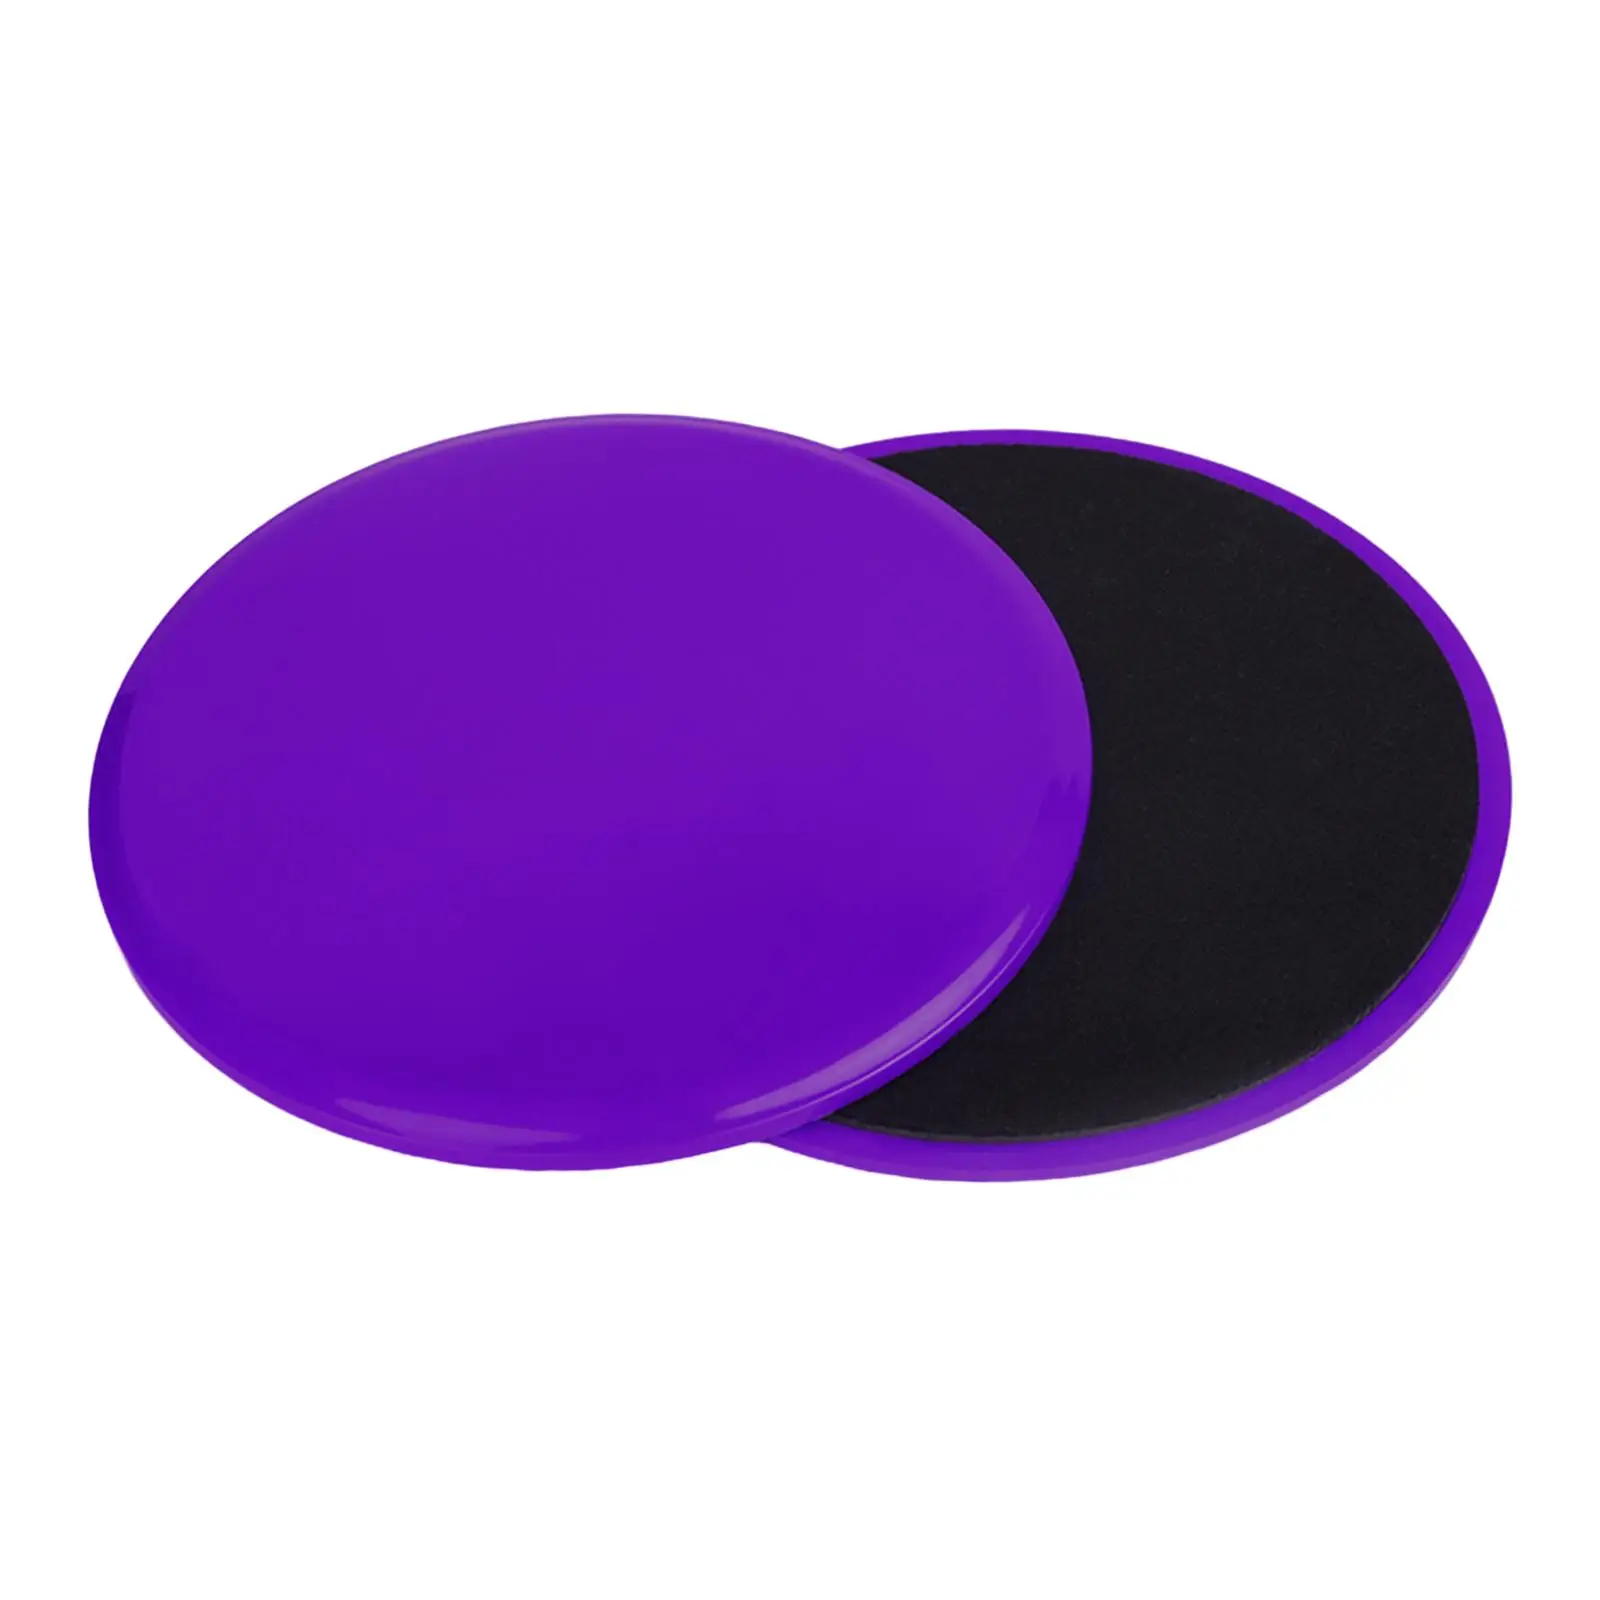 2-piece core glides for training double-sided gliding discs on carpet or